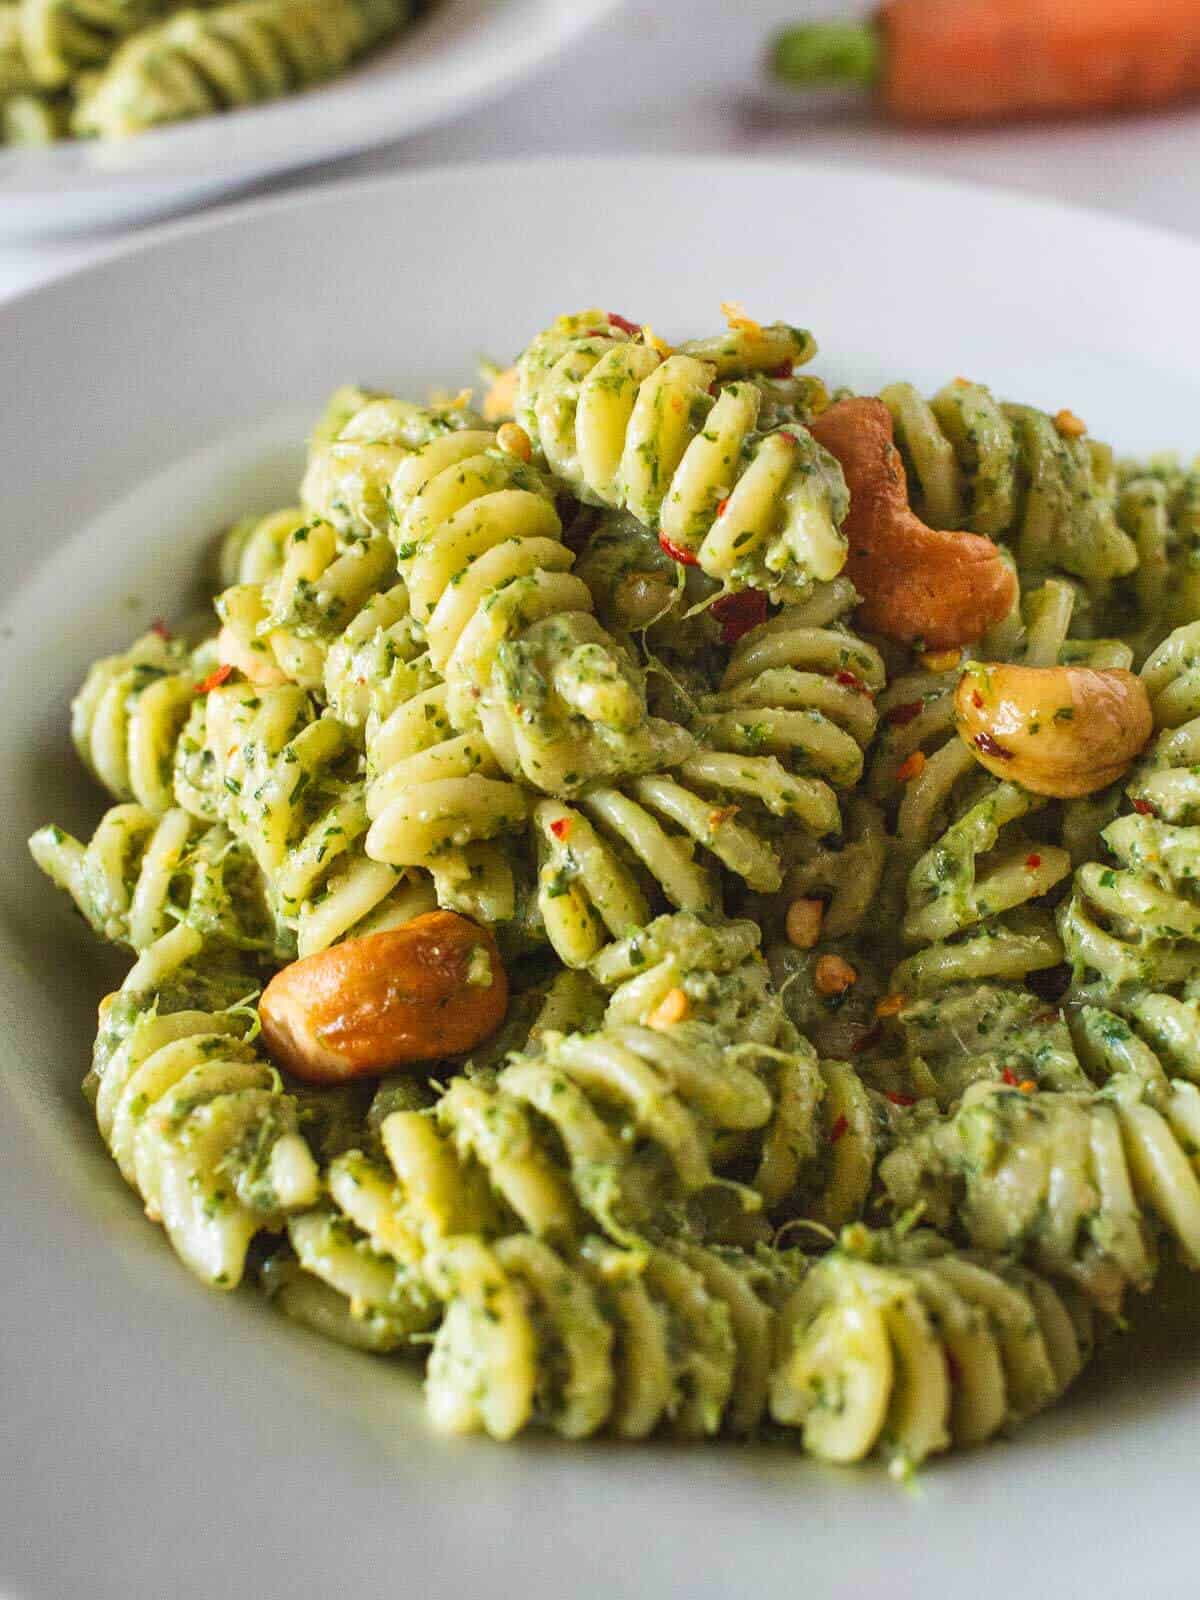 served carrot greens pesto pasta salad topped with cashews